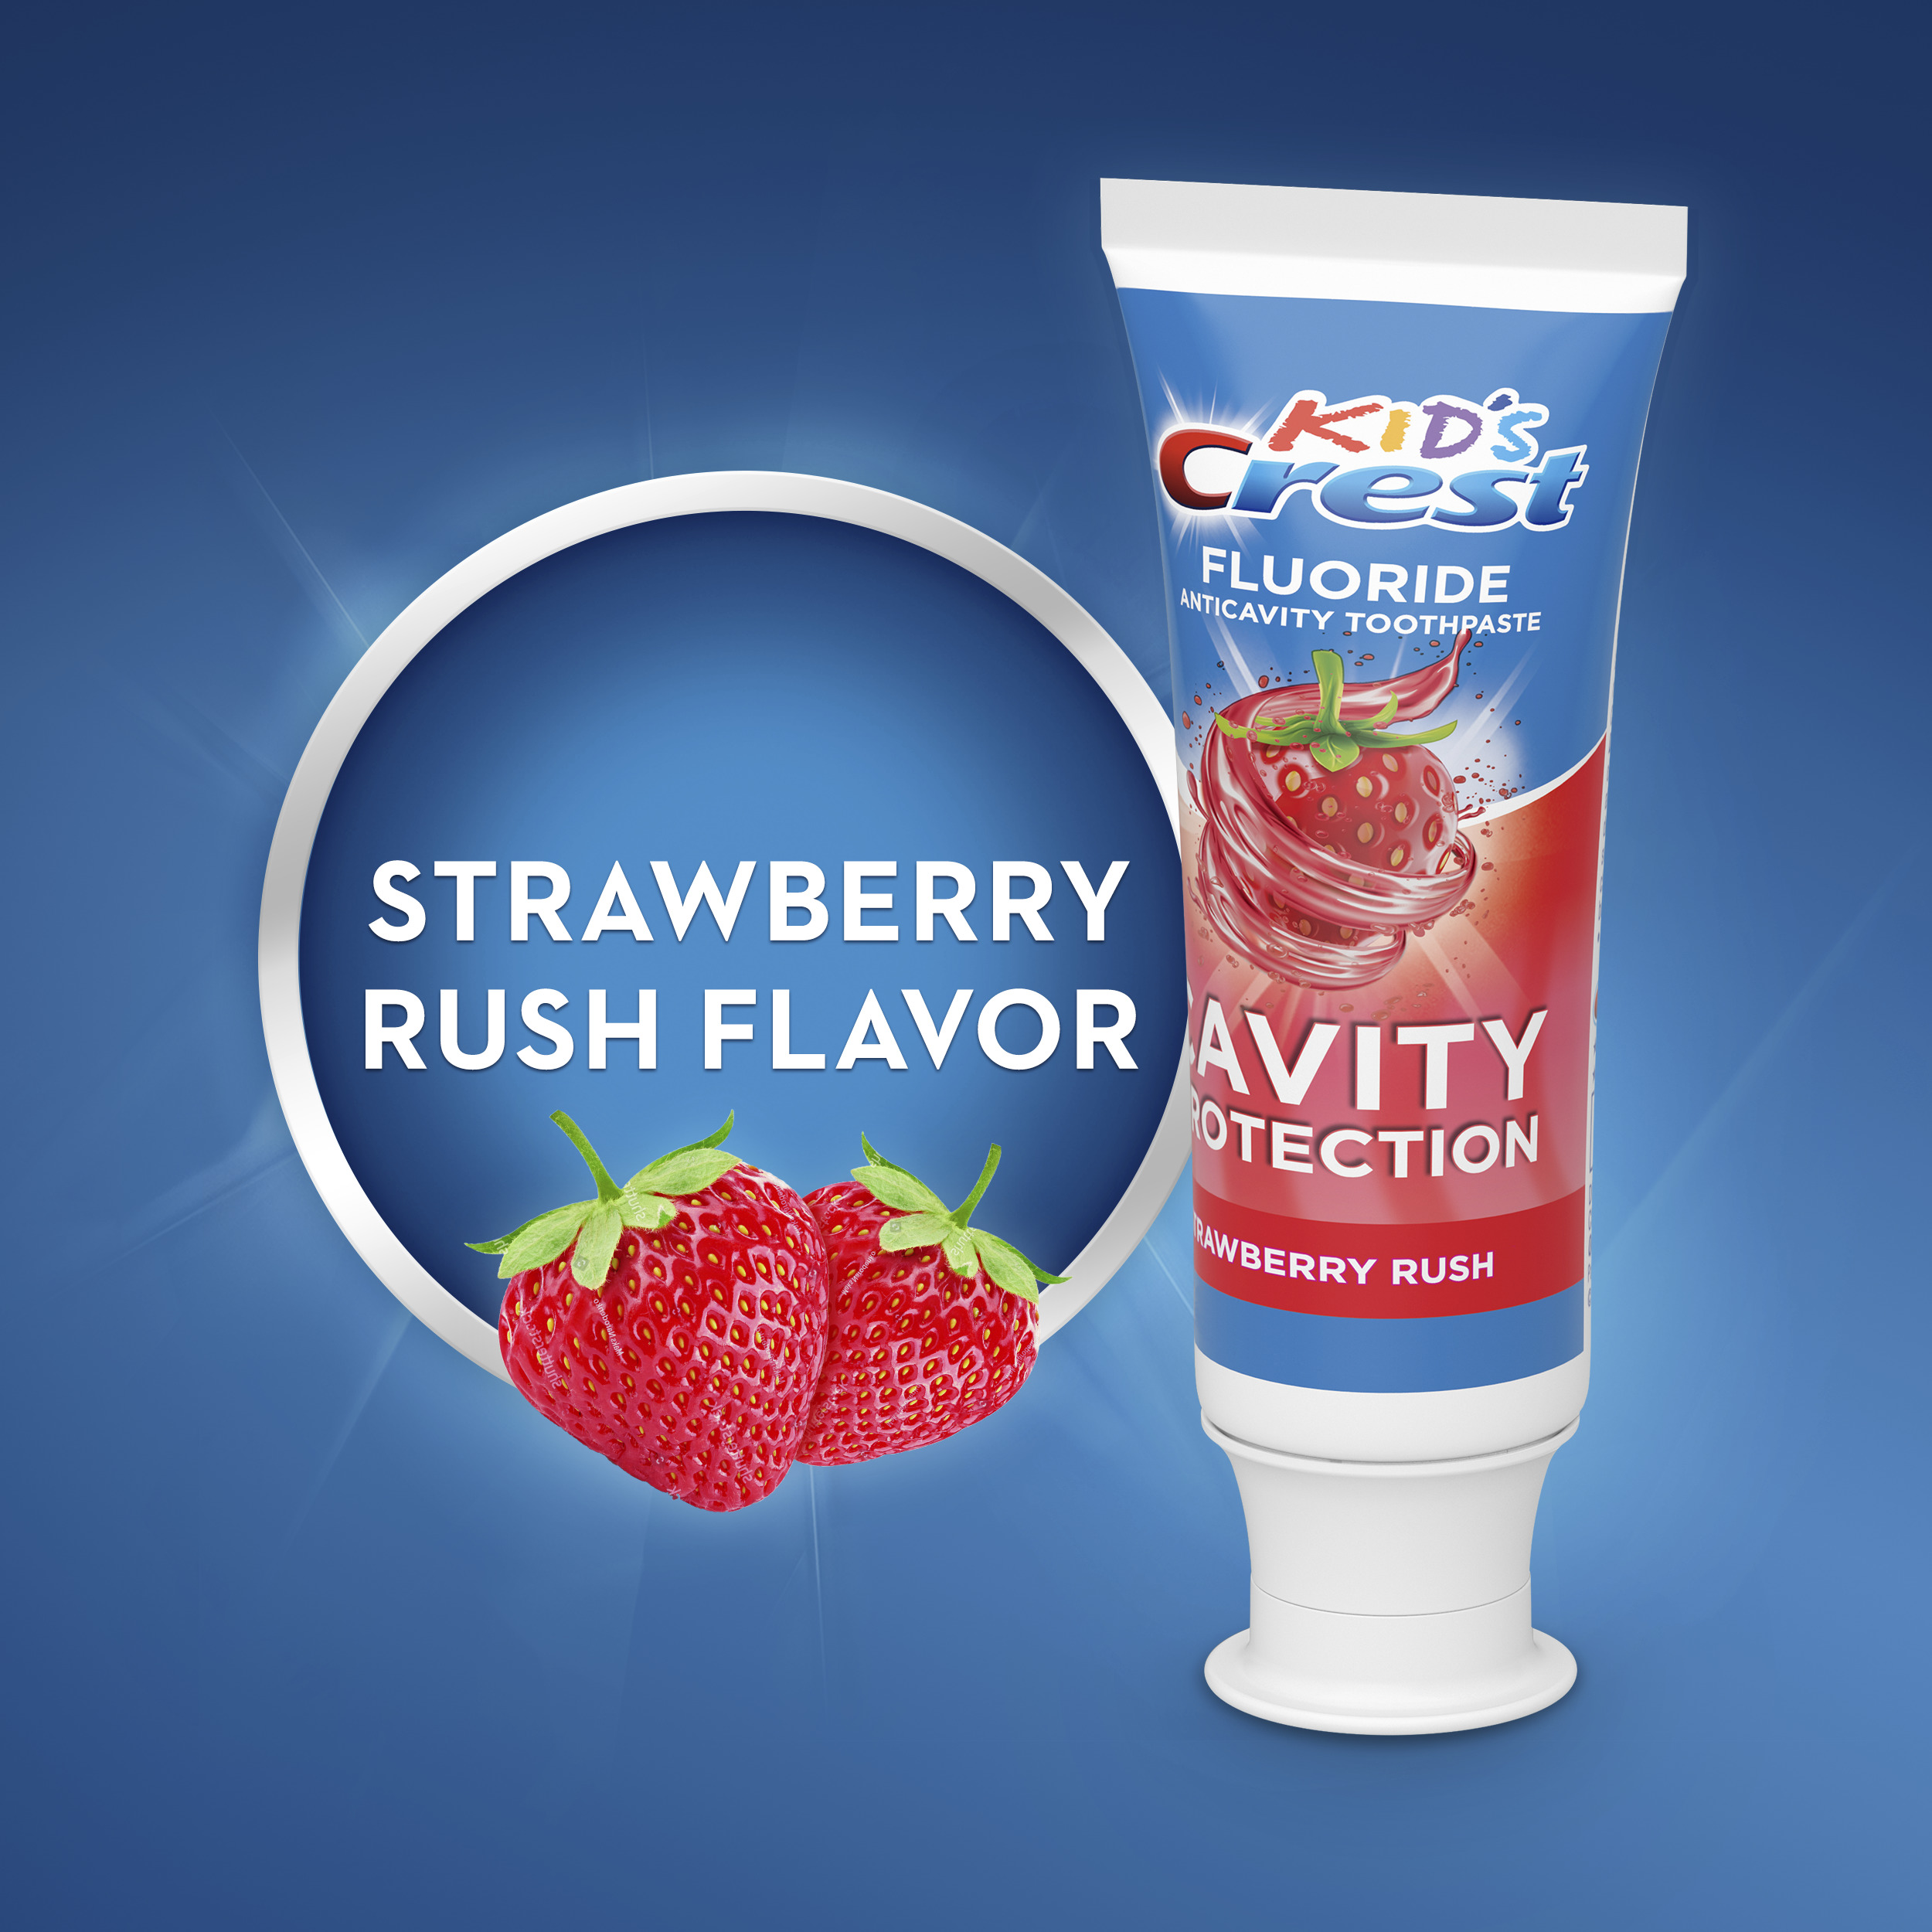 Crest Kid's Cavity Protection Fluoride Toothpaste, Strawberry Rush, 4.2 oz - image 4 of 6